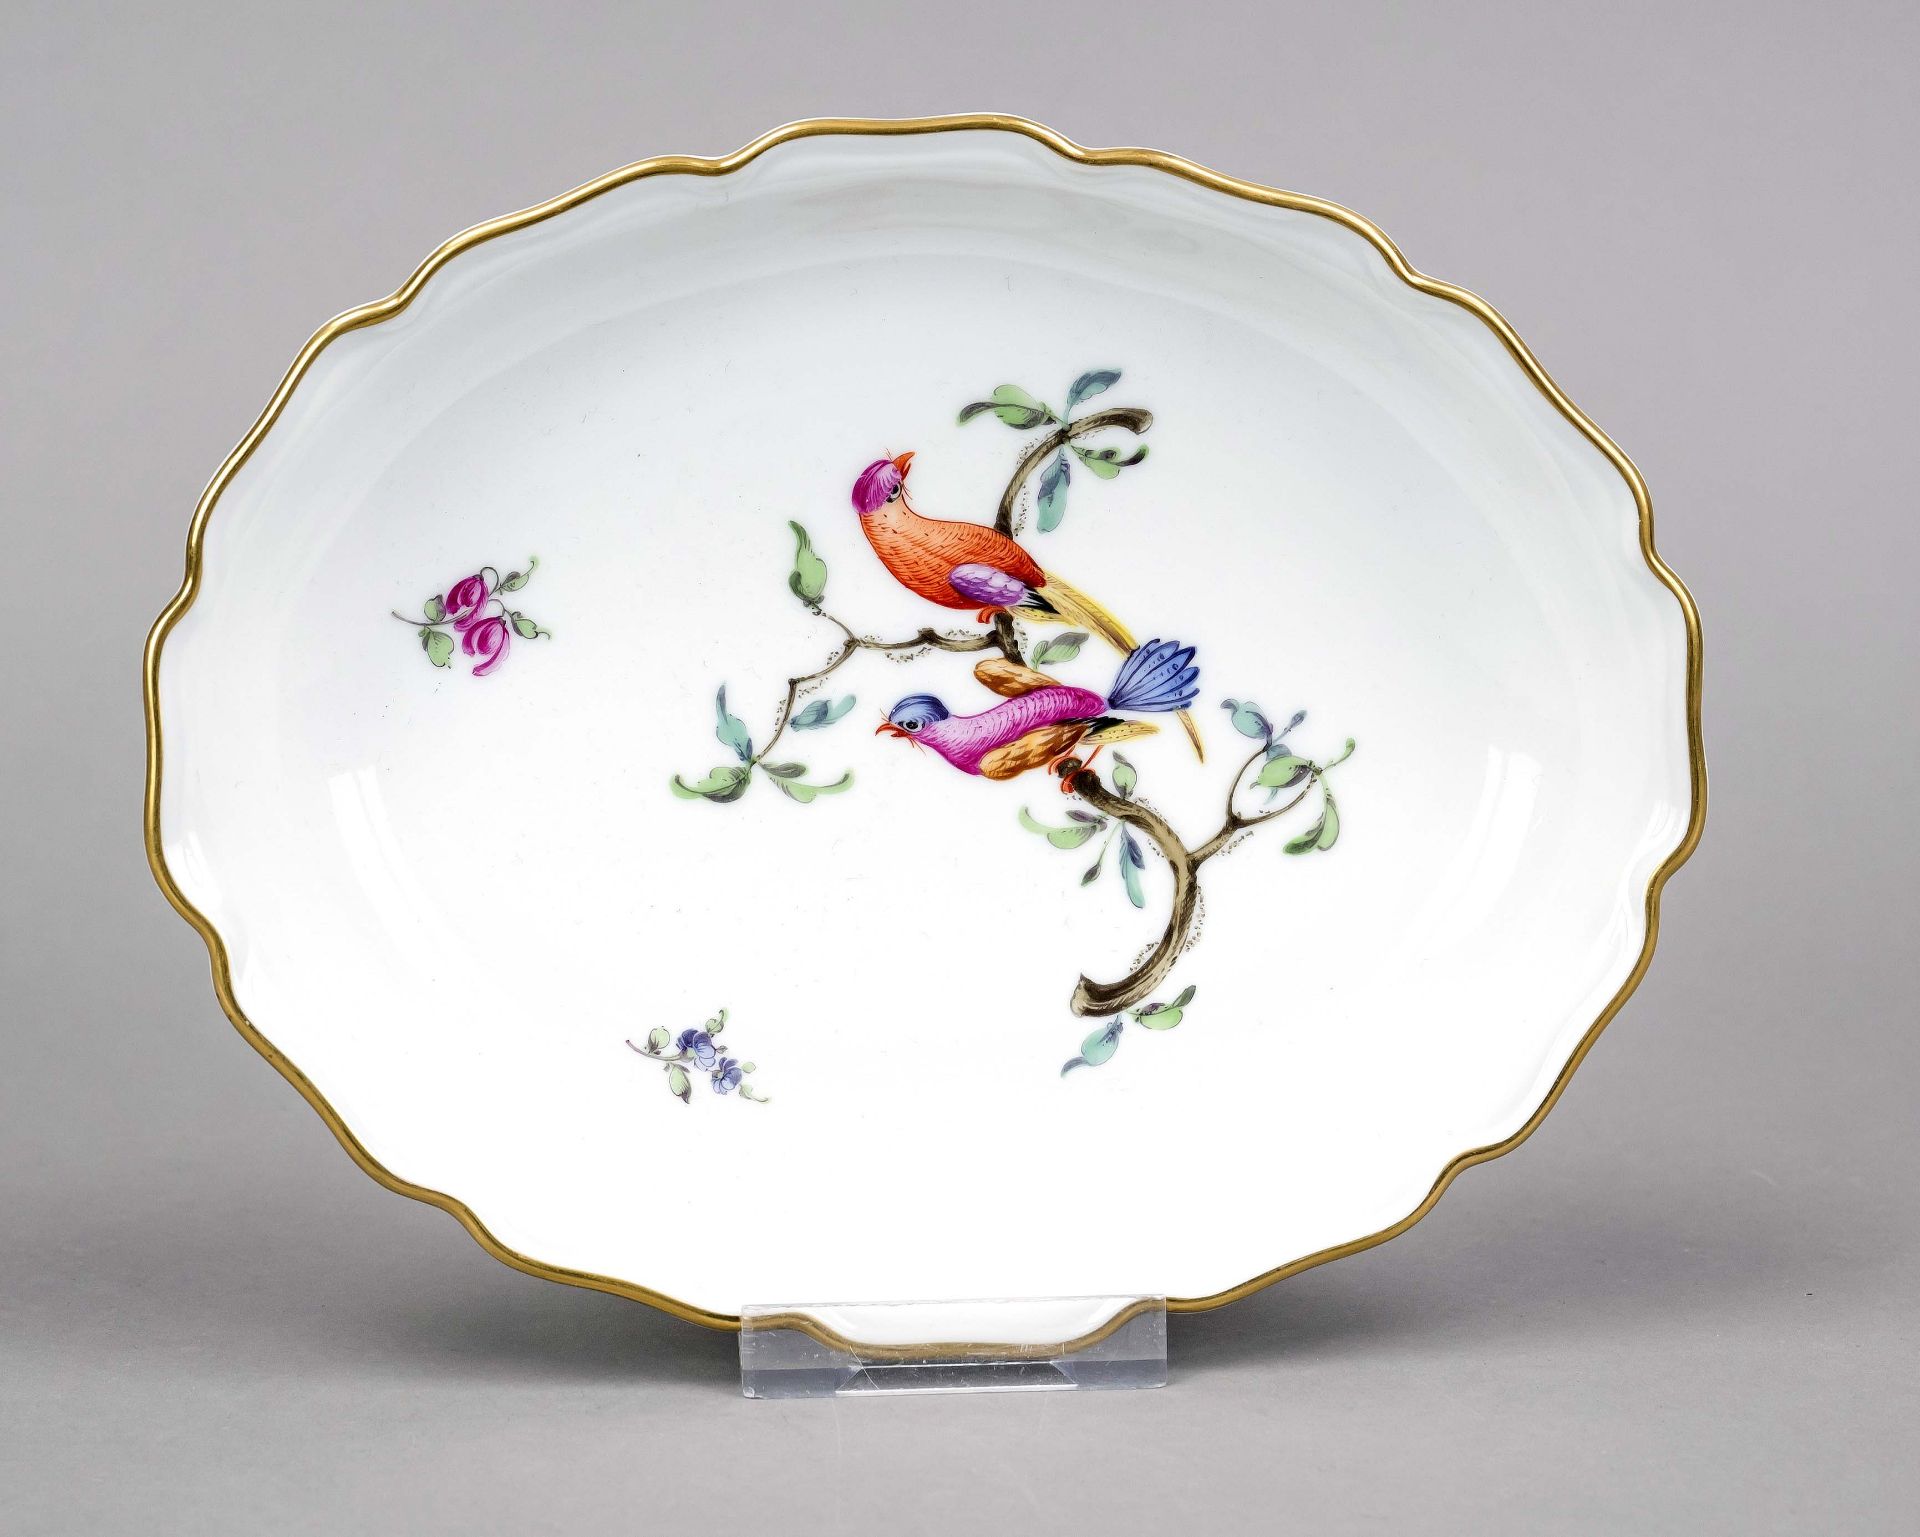 Oval bowl with wavy rim, Nymphenburg, mark 1976-1997, polychrome painting with birds on a branch